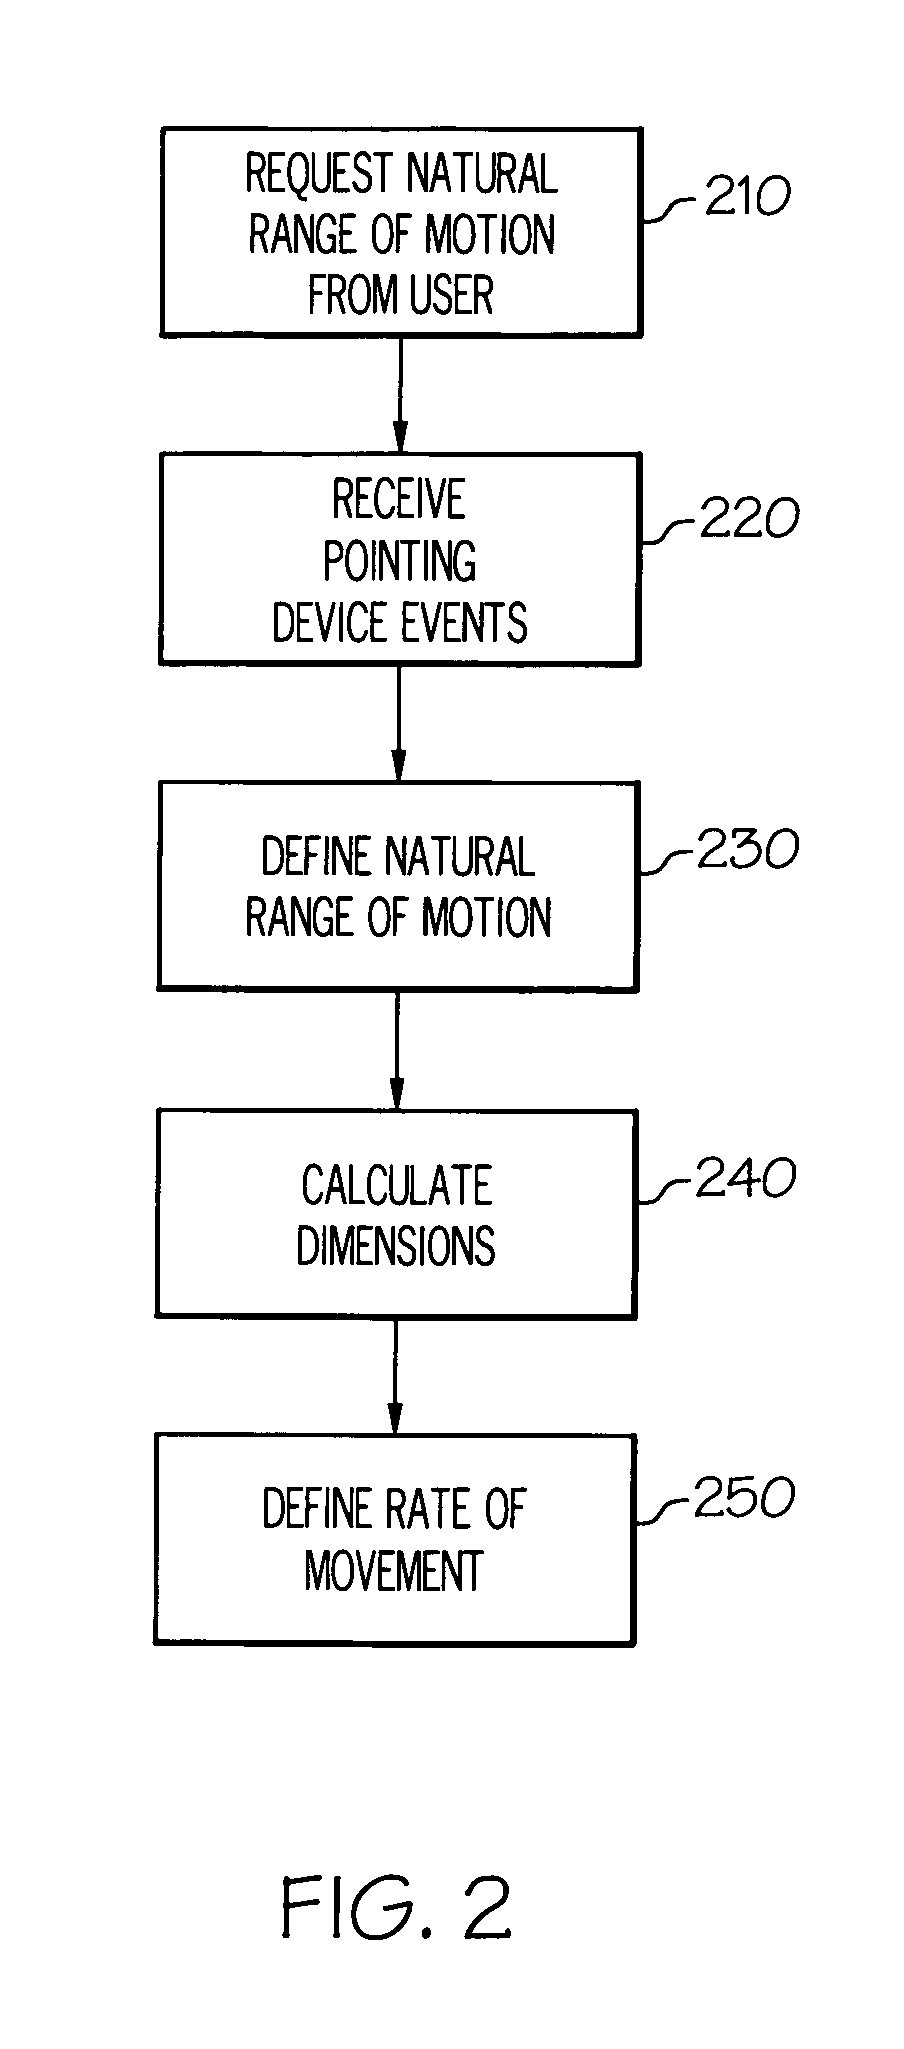 Autonomic control of calibration for pointing device